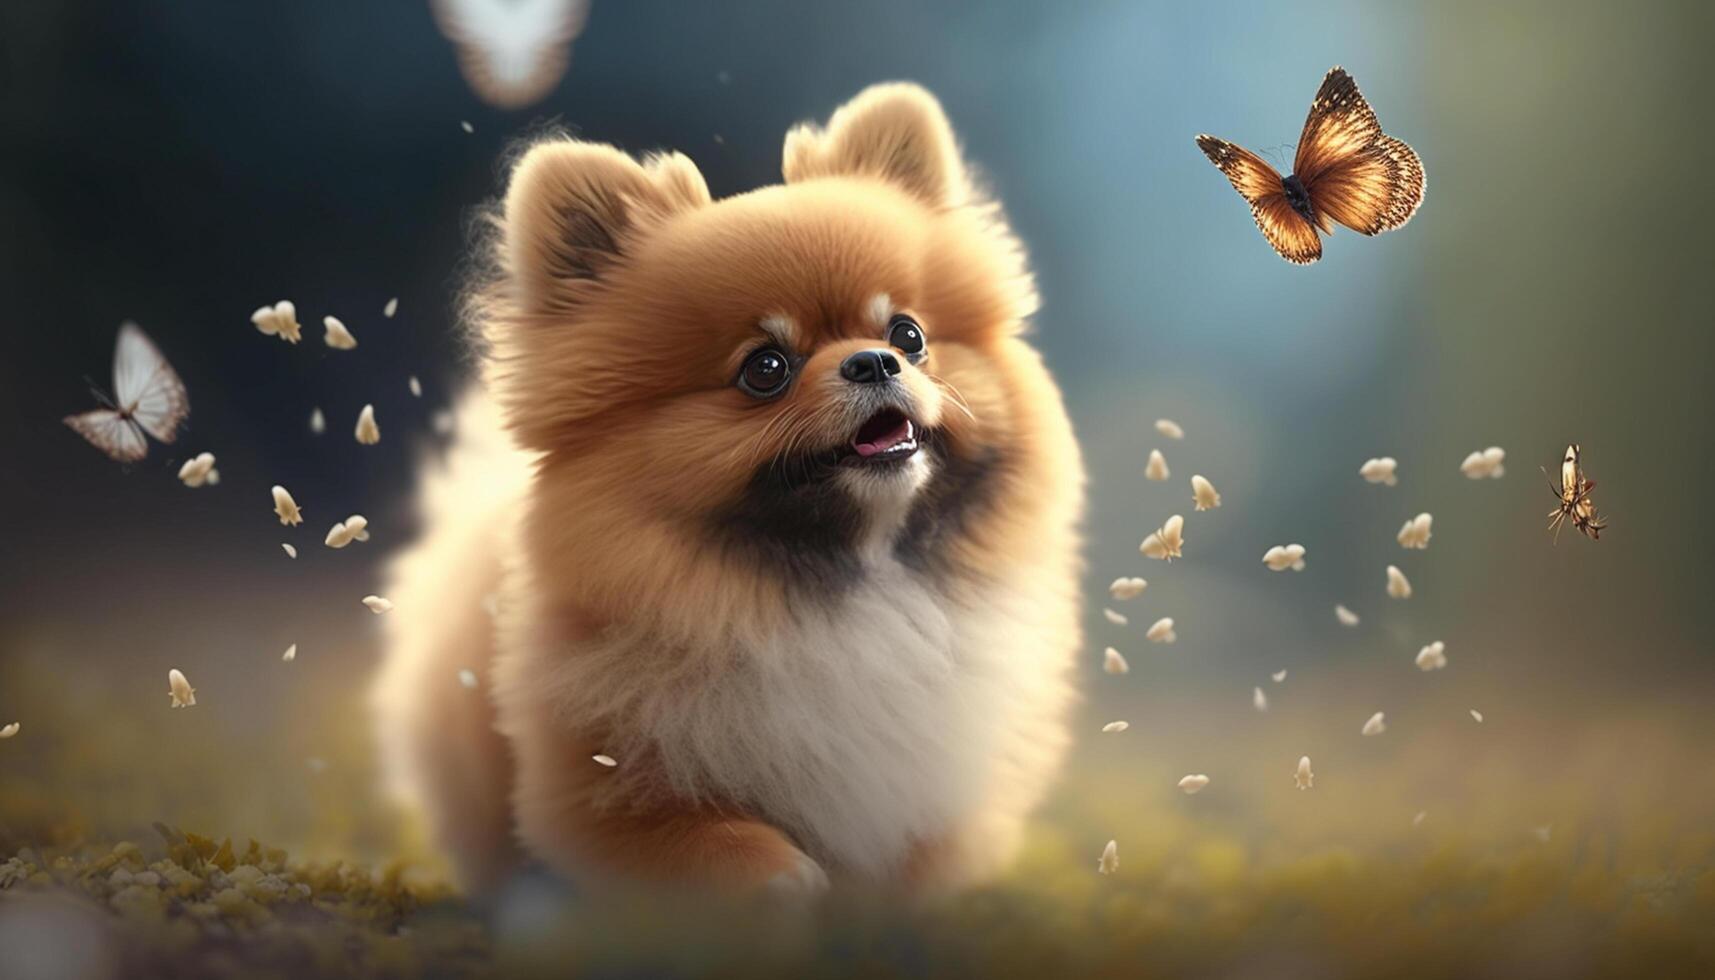 Chasing Butterflies Adorable Pomeranian Dog on a Green Meadow photo